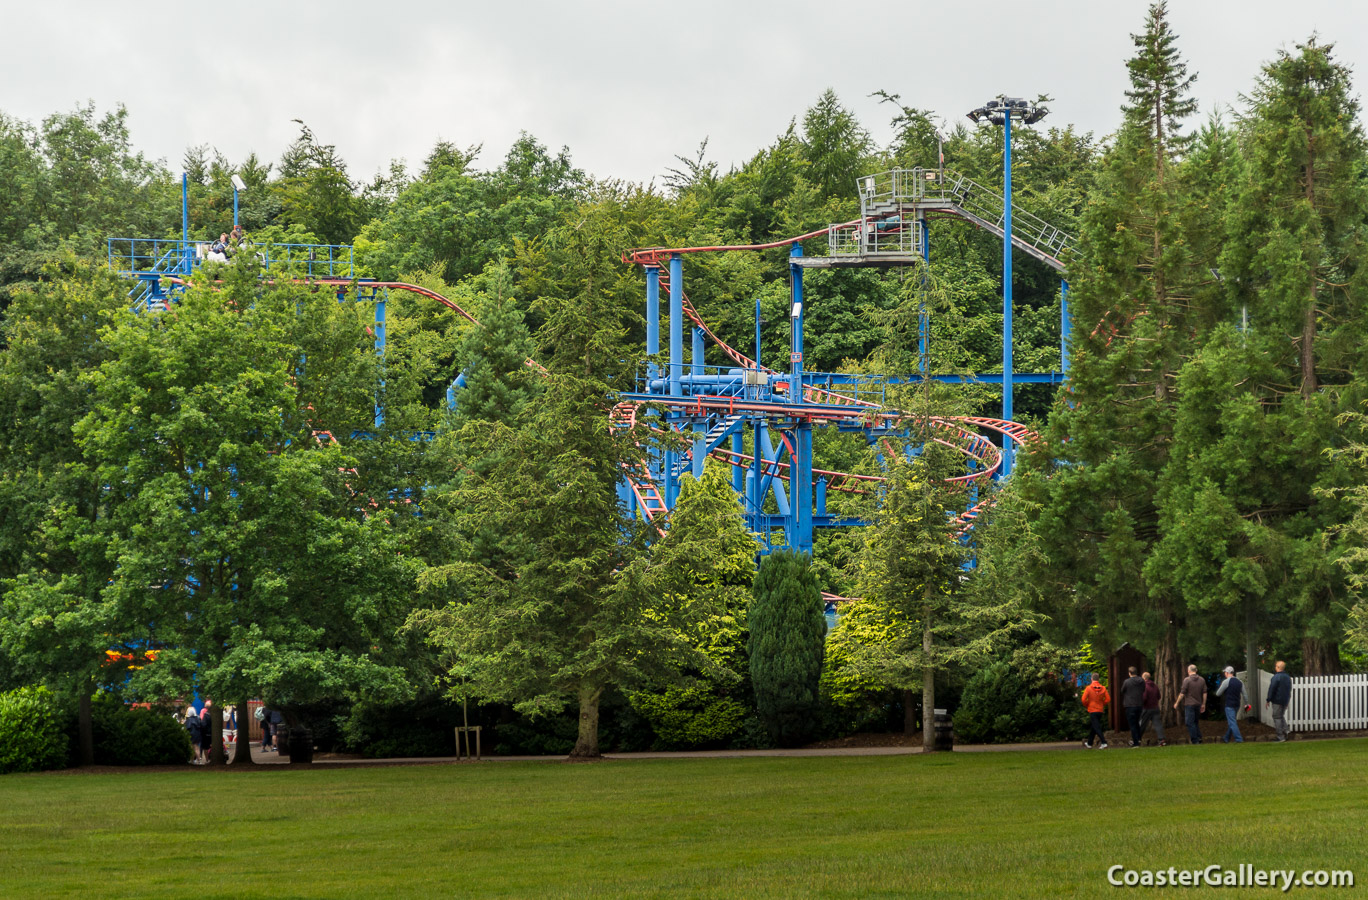 Spinball Whizzer roller coaster at Alton Towers